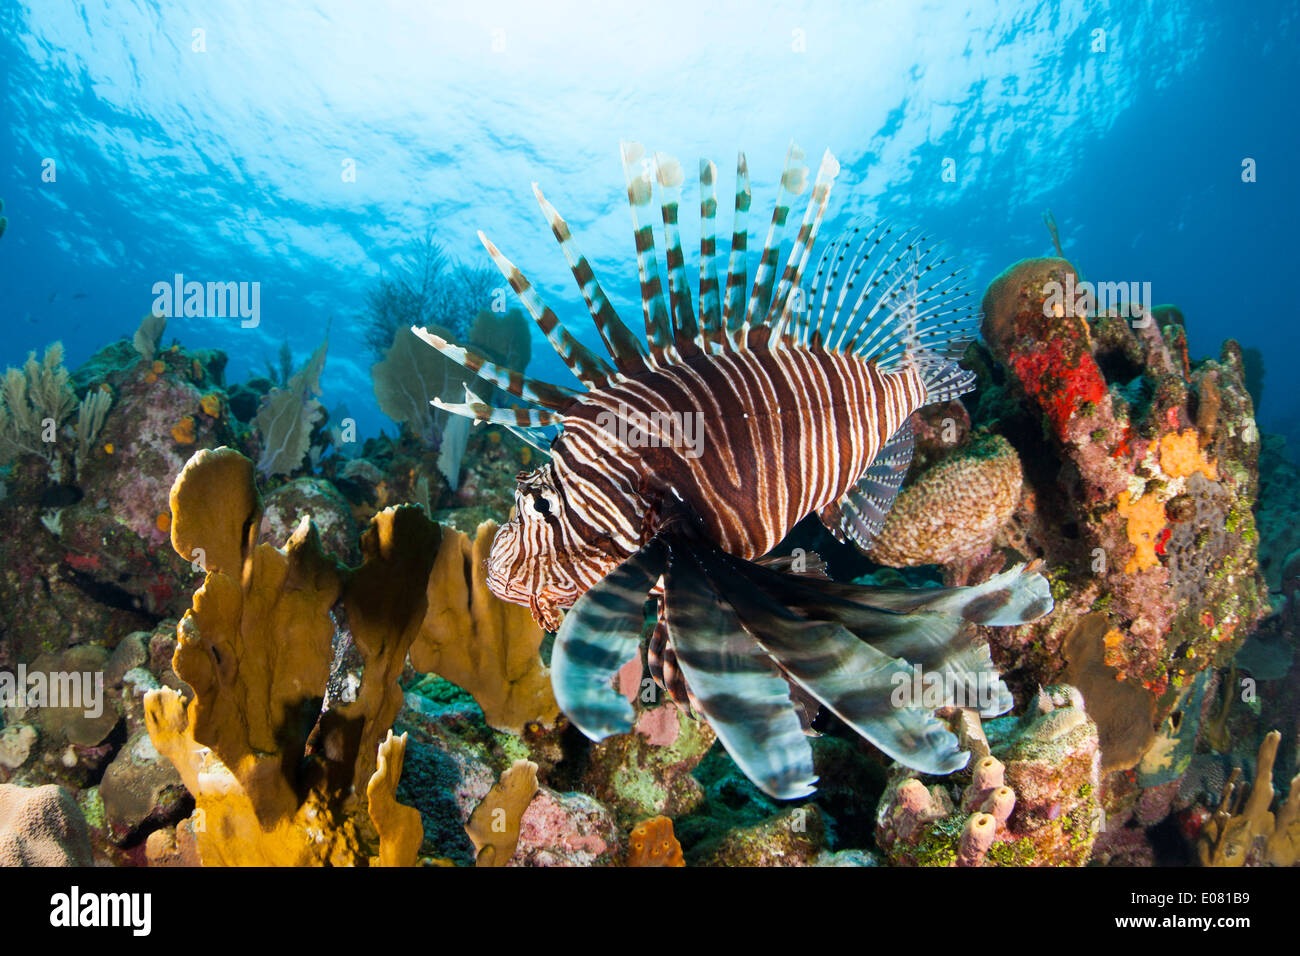 Red Lionfish (Pterois volitans) on a tropical coral reef off Roatan, Honduras. Stock Photo